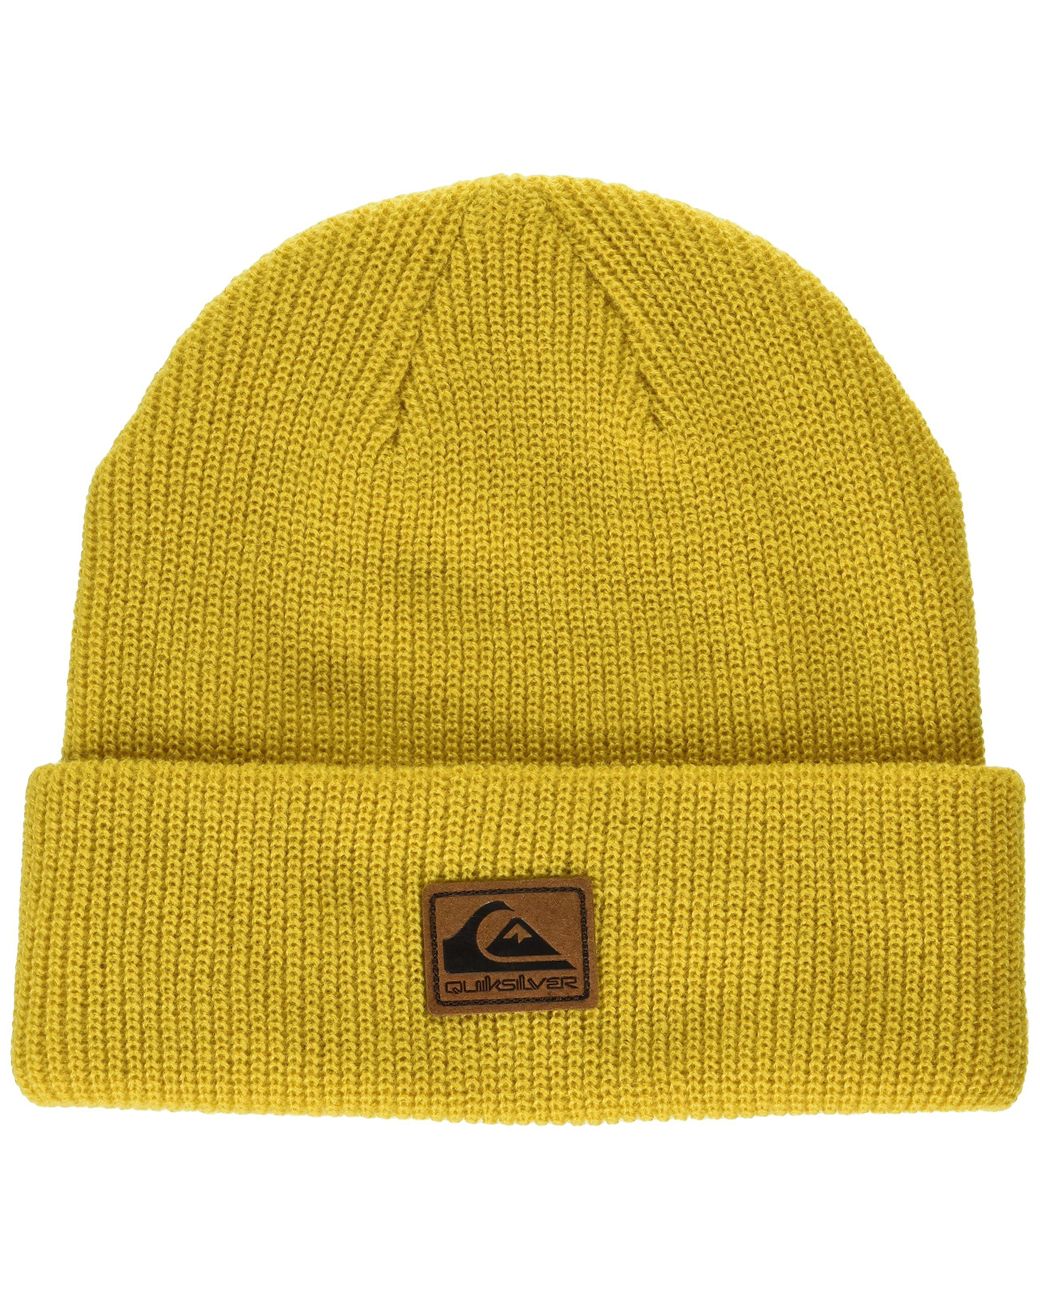 Quiksilver Performer 2 Beanie in Yellow for Men | Lyst